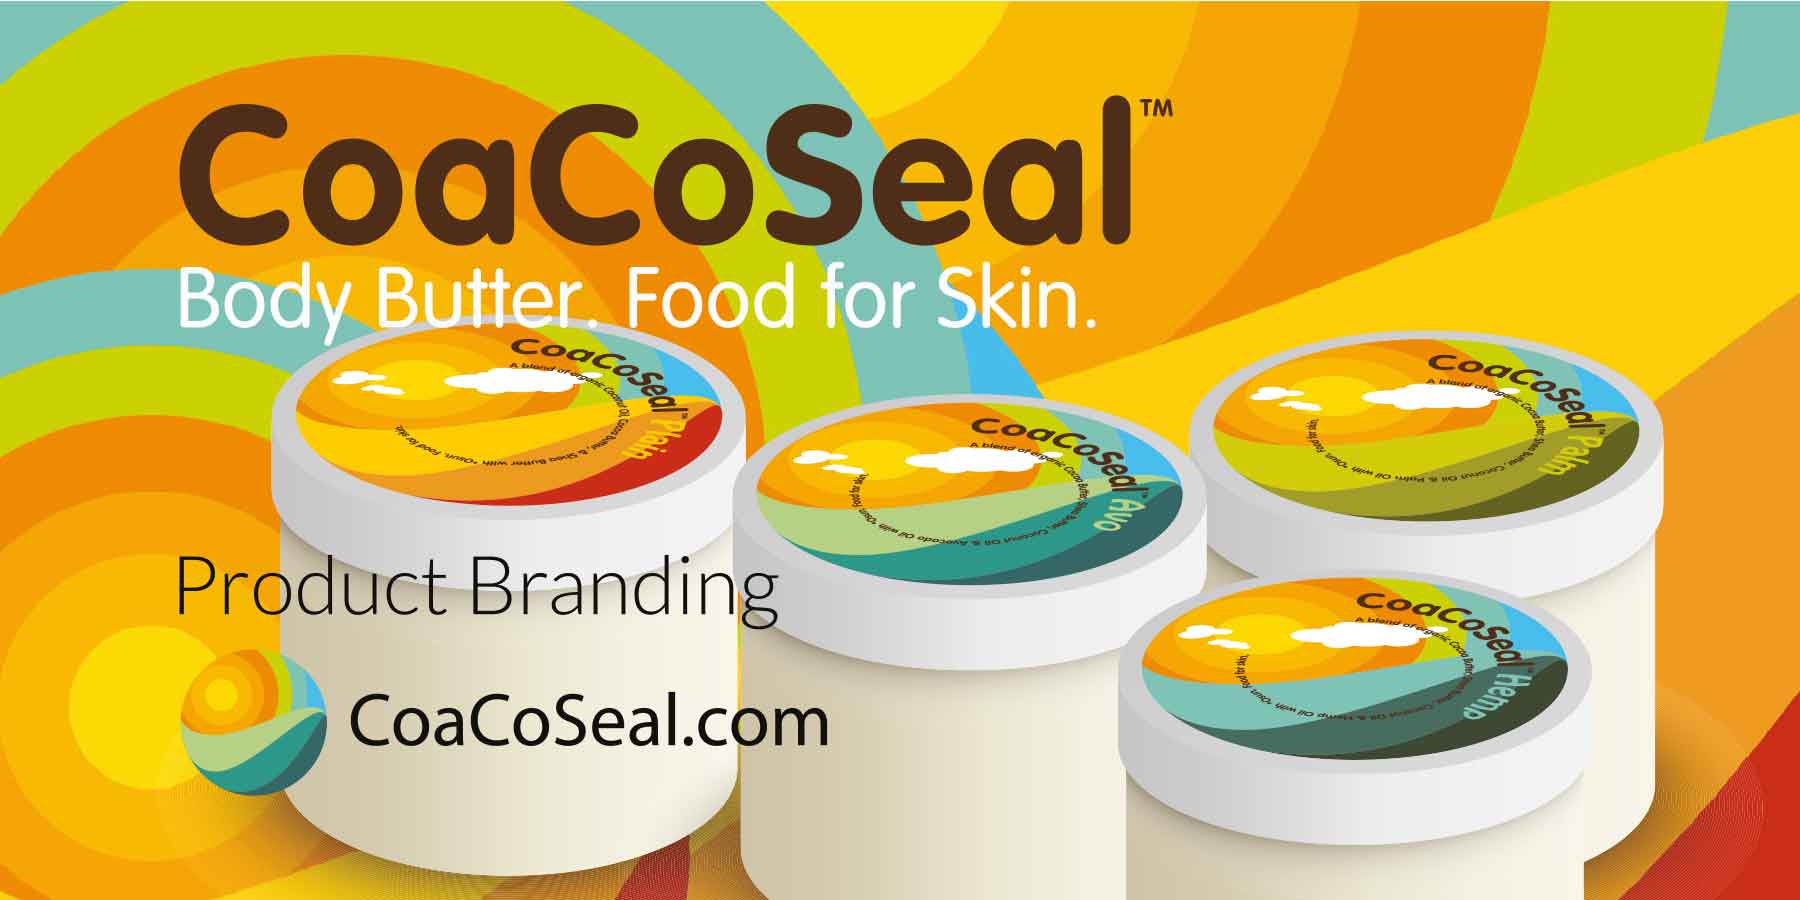 CoaCoSeal.com | Body Butter. Food for Skin.